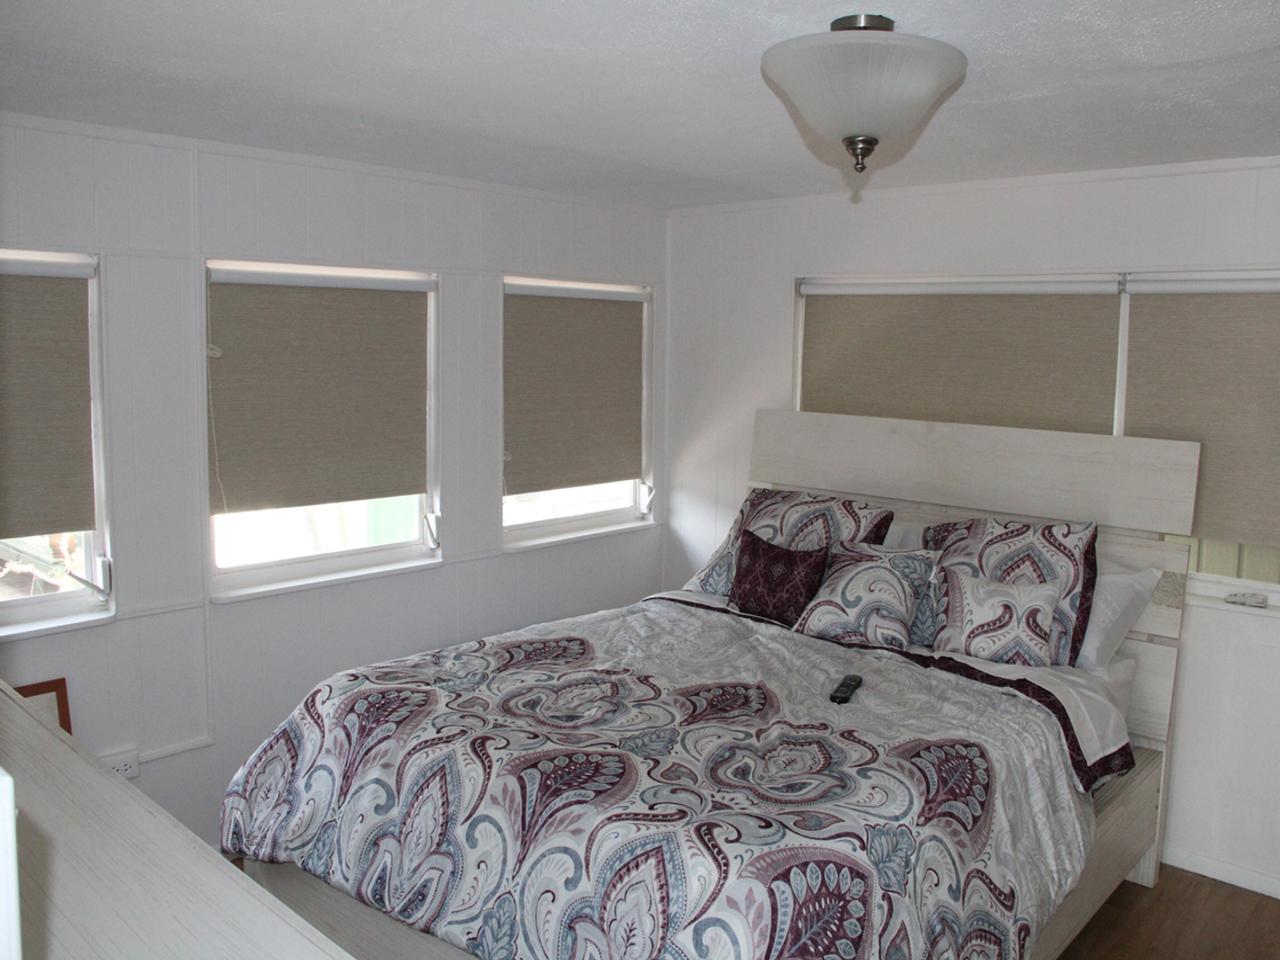 Roller shades in a bedroom